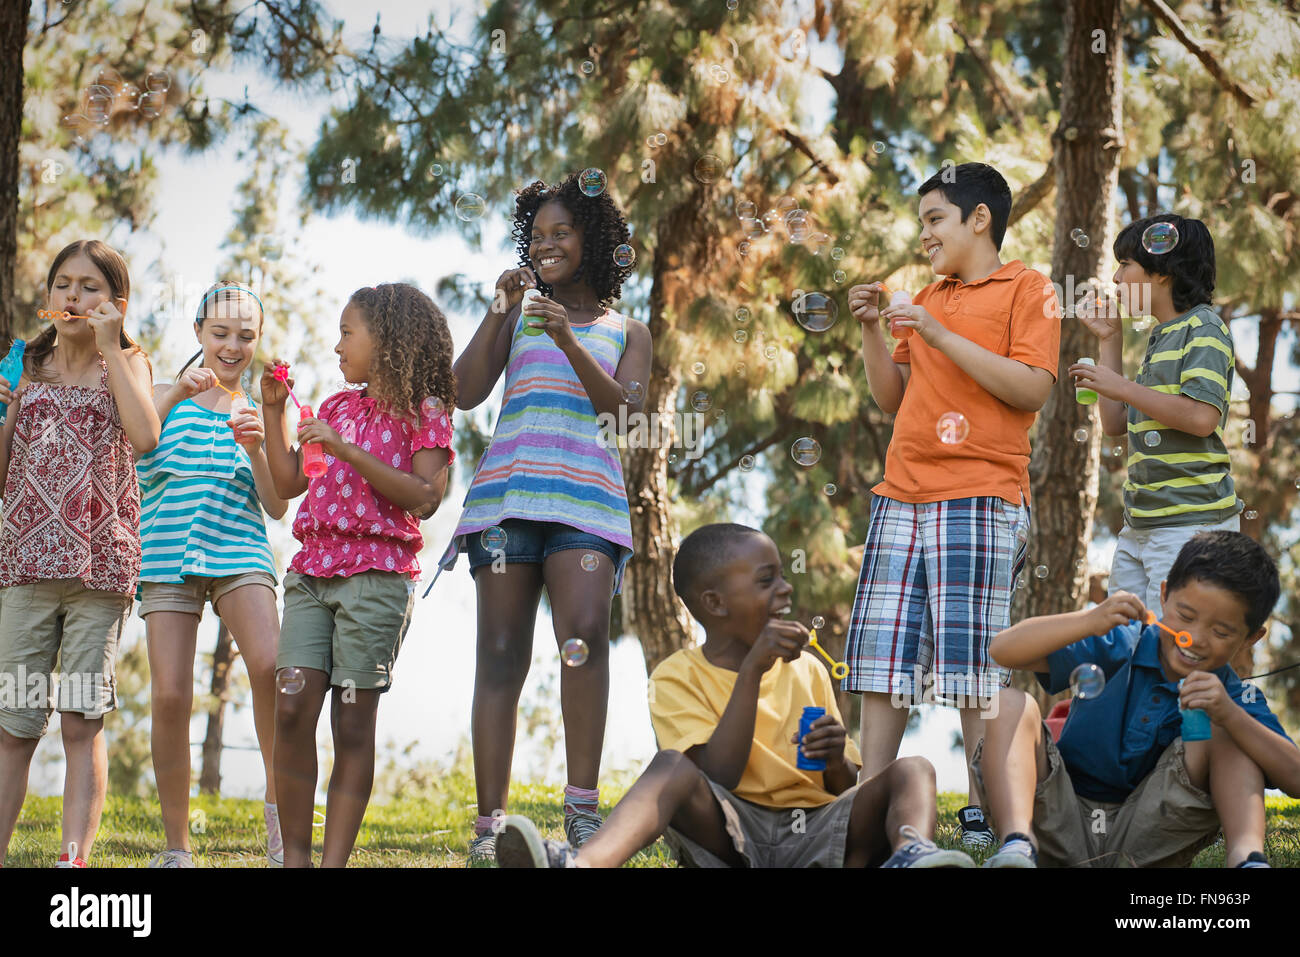 Children playing outdoors in summer Stock Photo